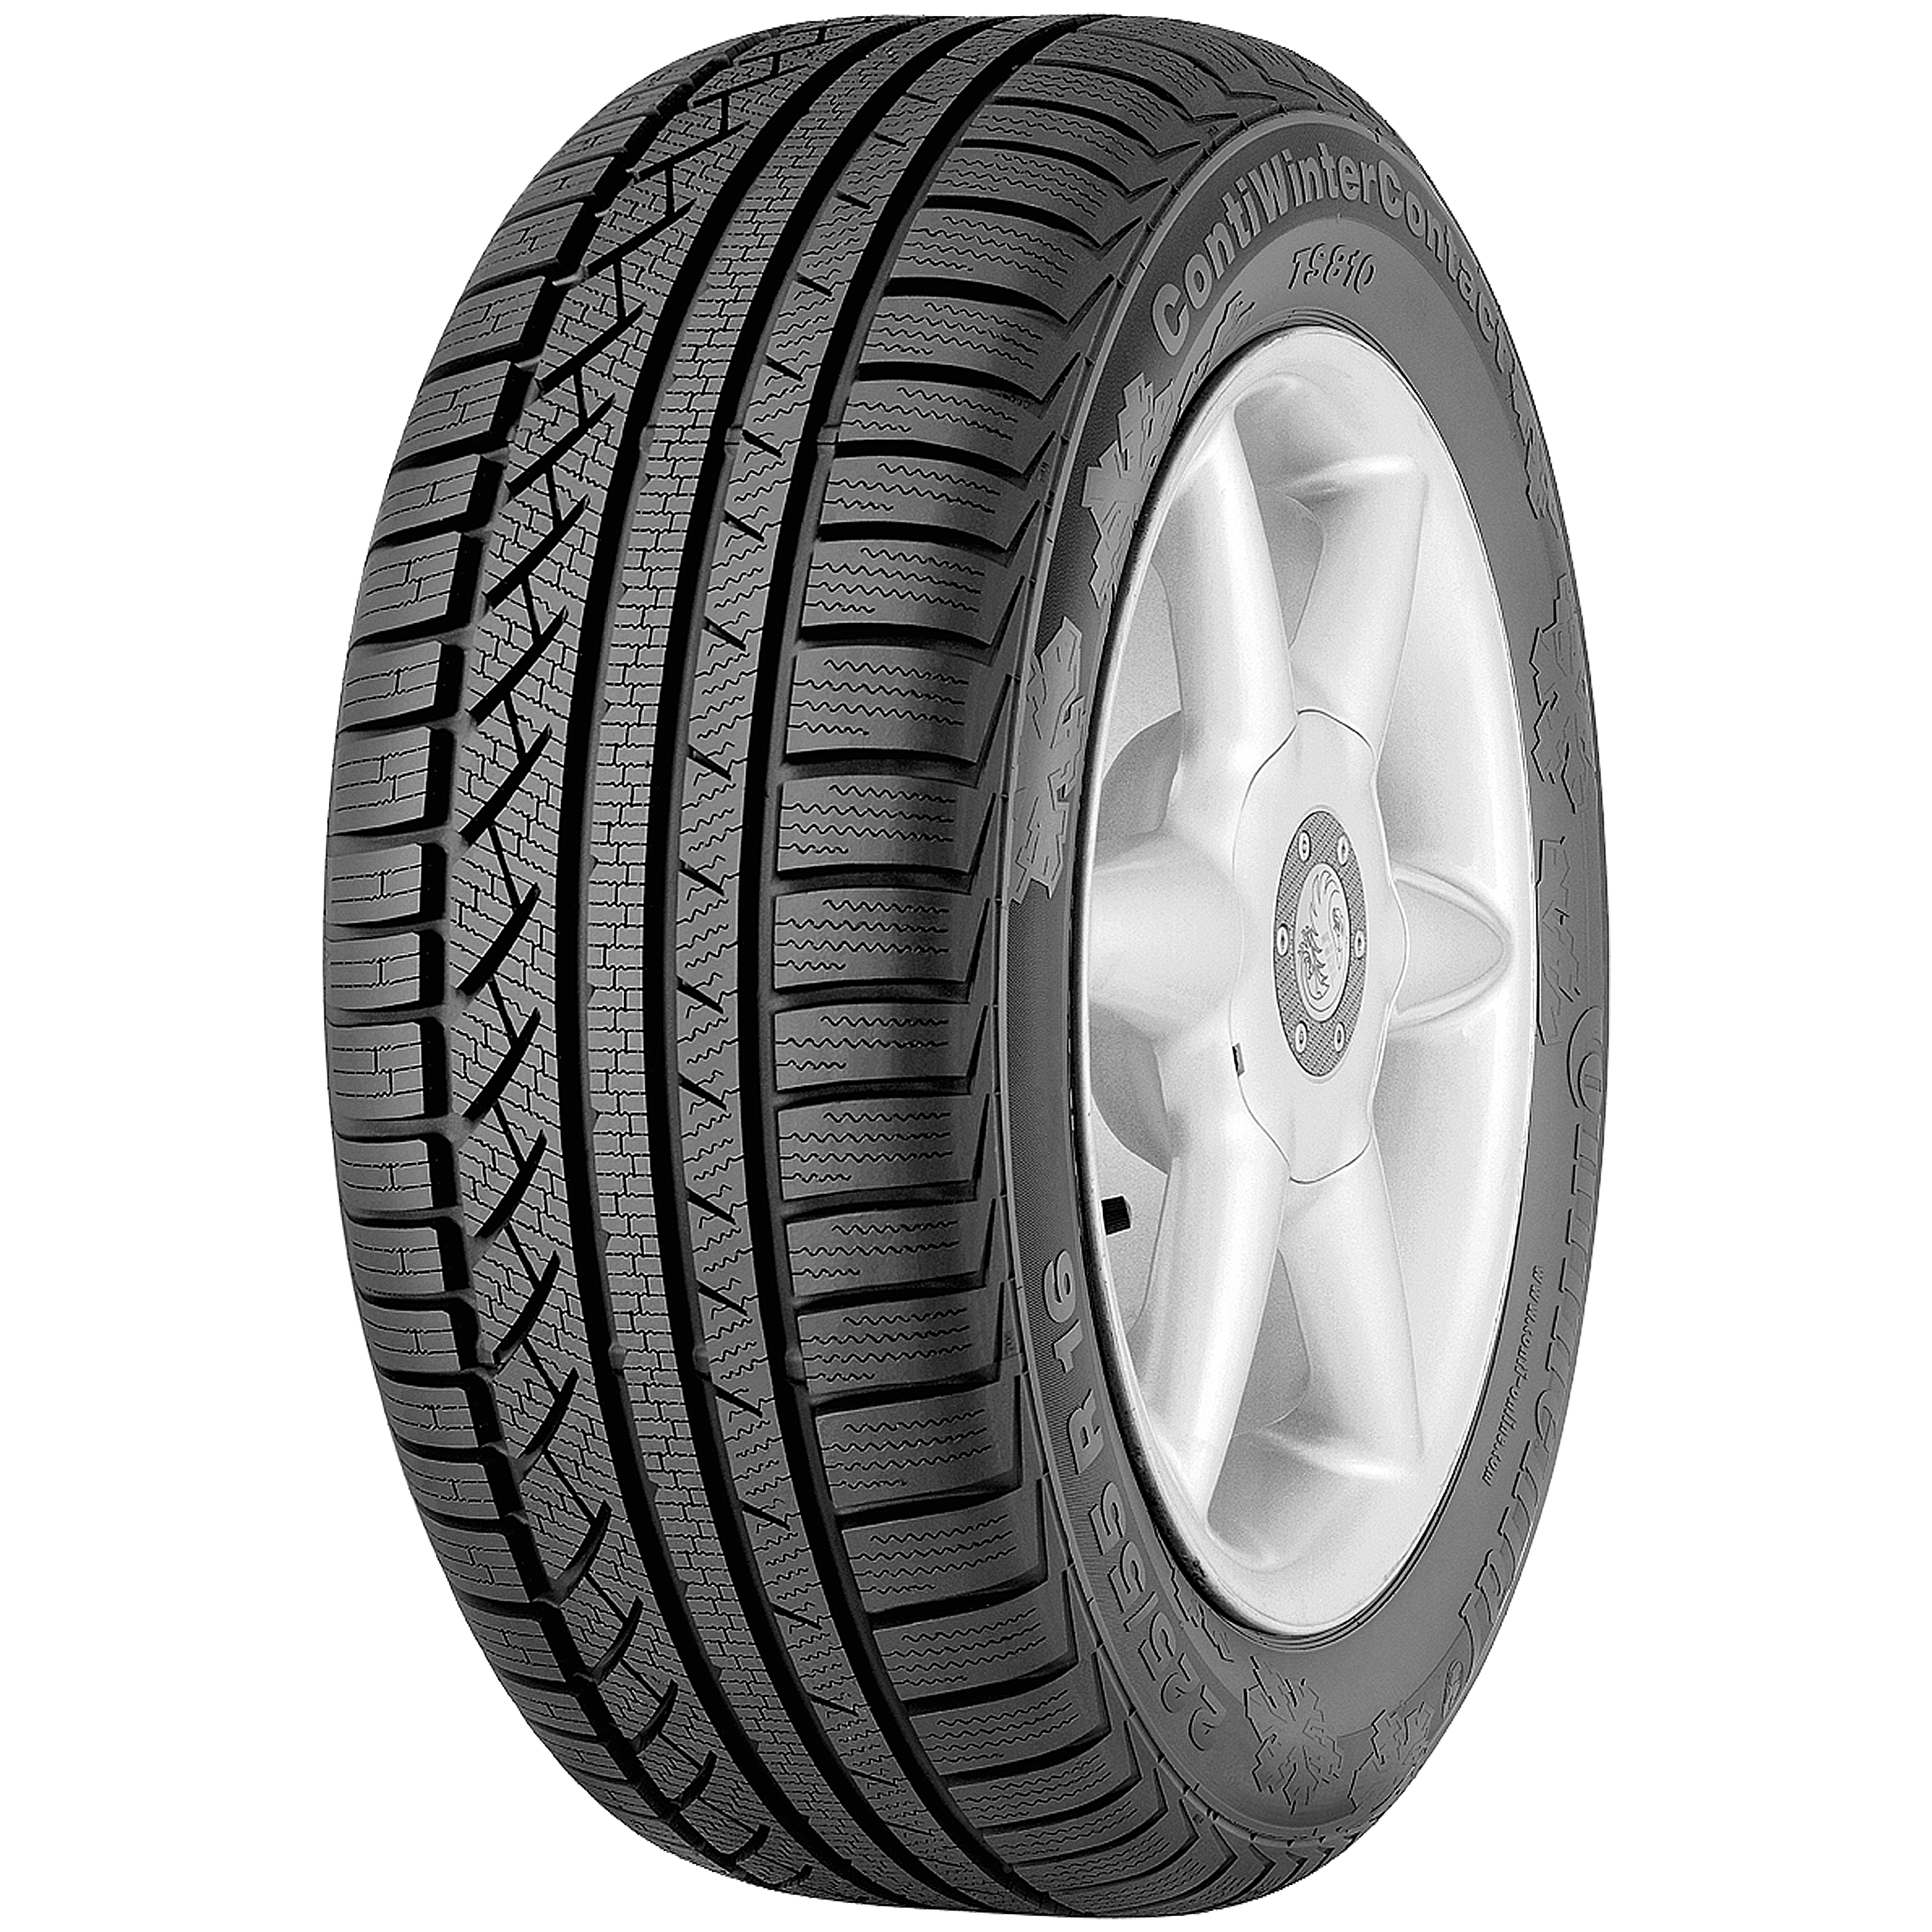 ContiWinterContact TS 810: The comfortable winter tire for medium and  luxury-class cars